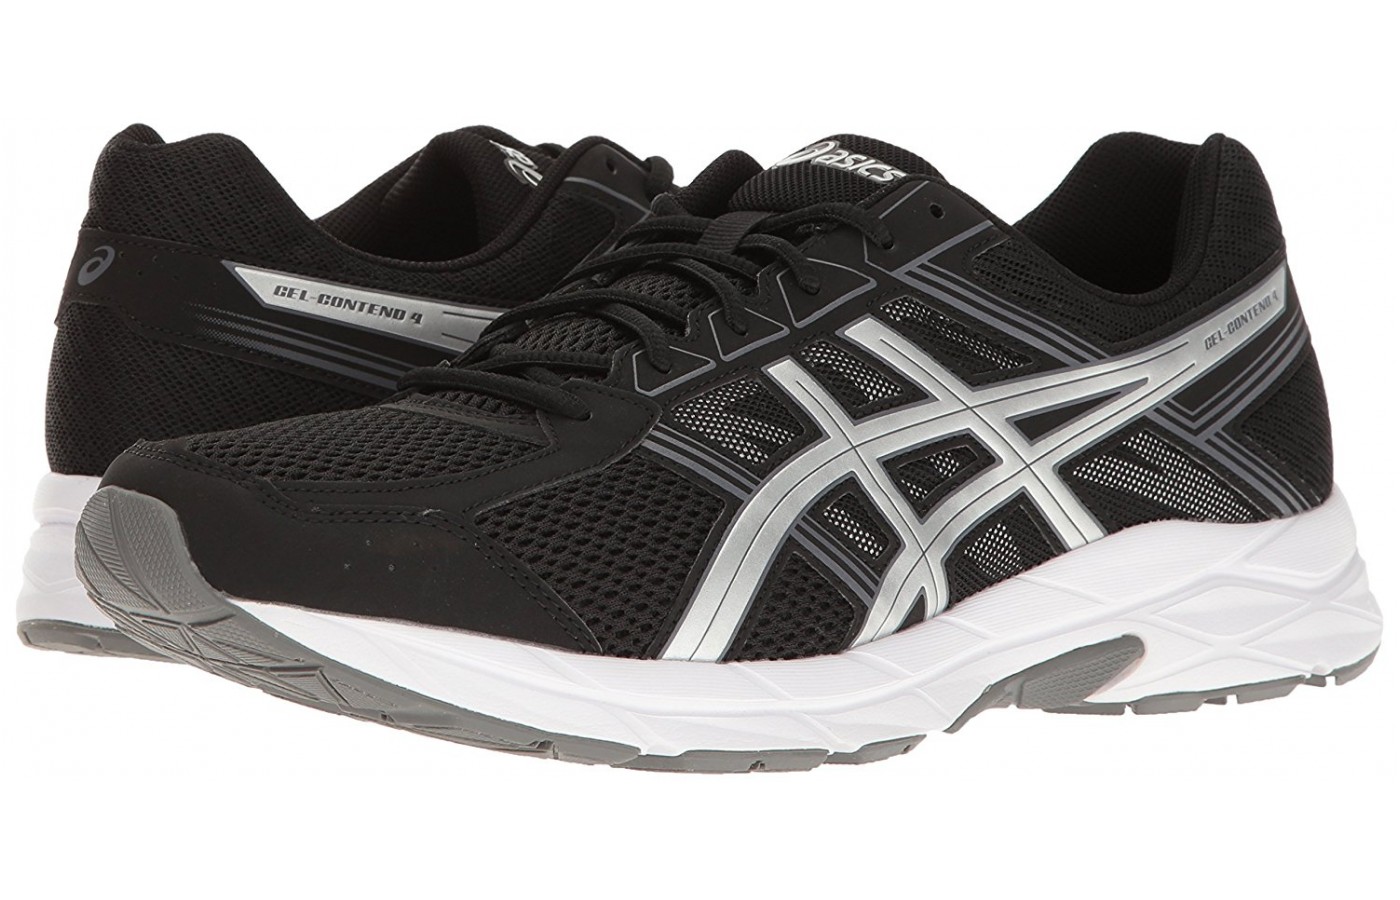 Asics Gel Contend 3 Tested for 